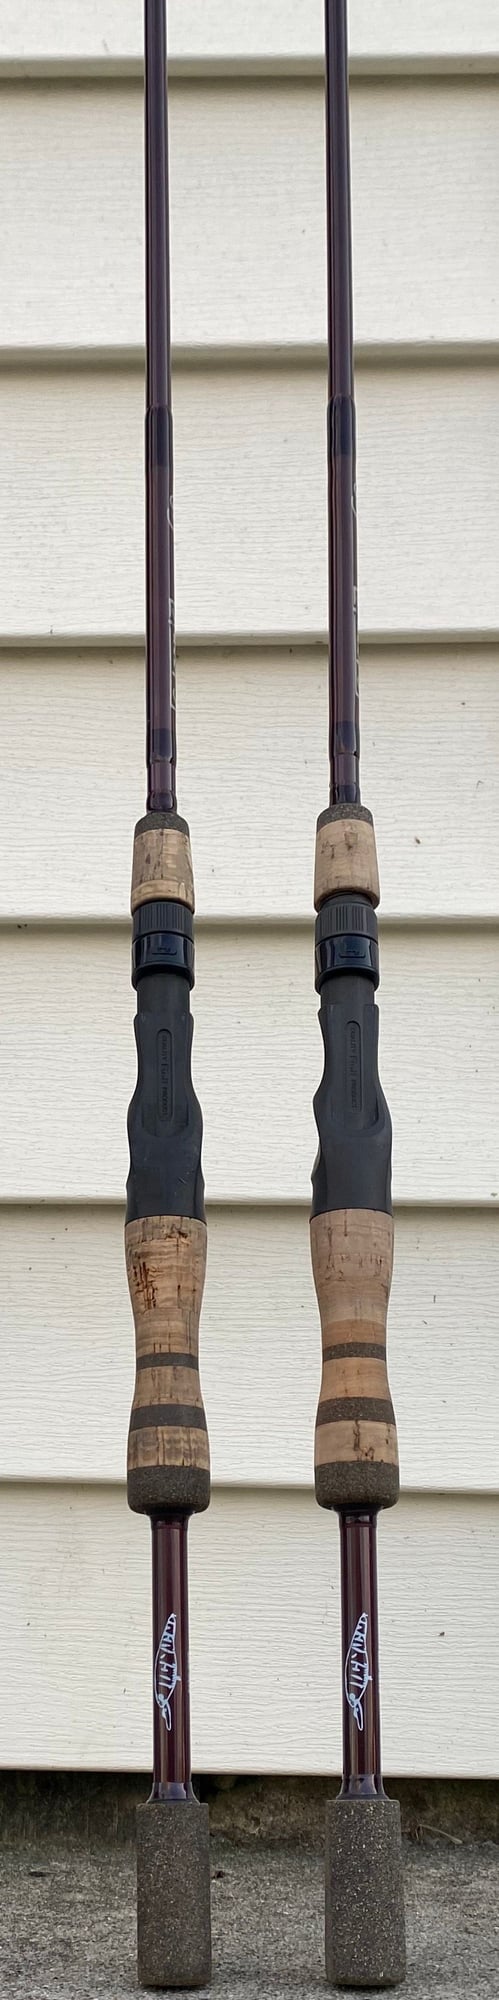 G-Loomis GL2 Casting rods - The Hull Truth - Boating and Fishing Forum